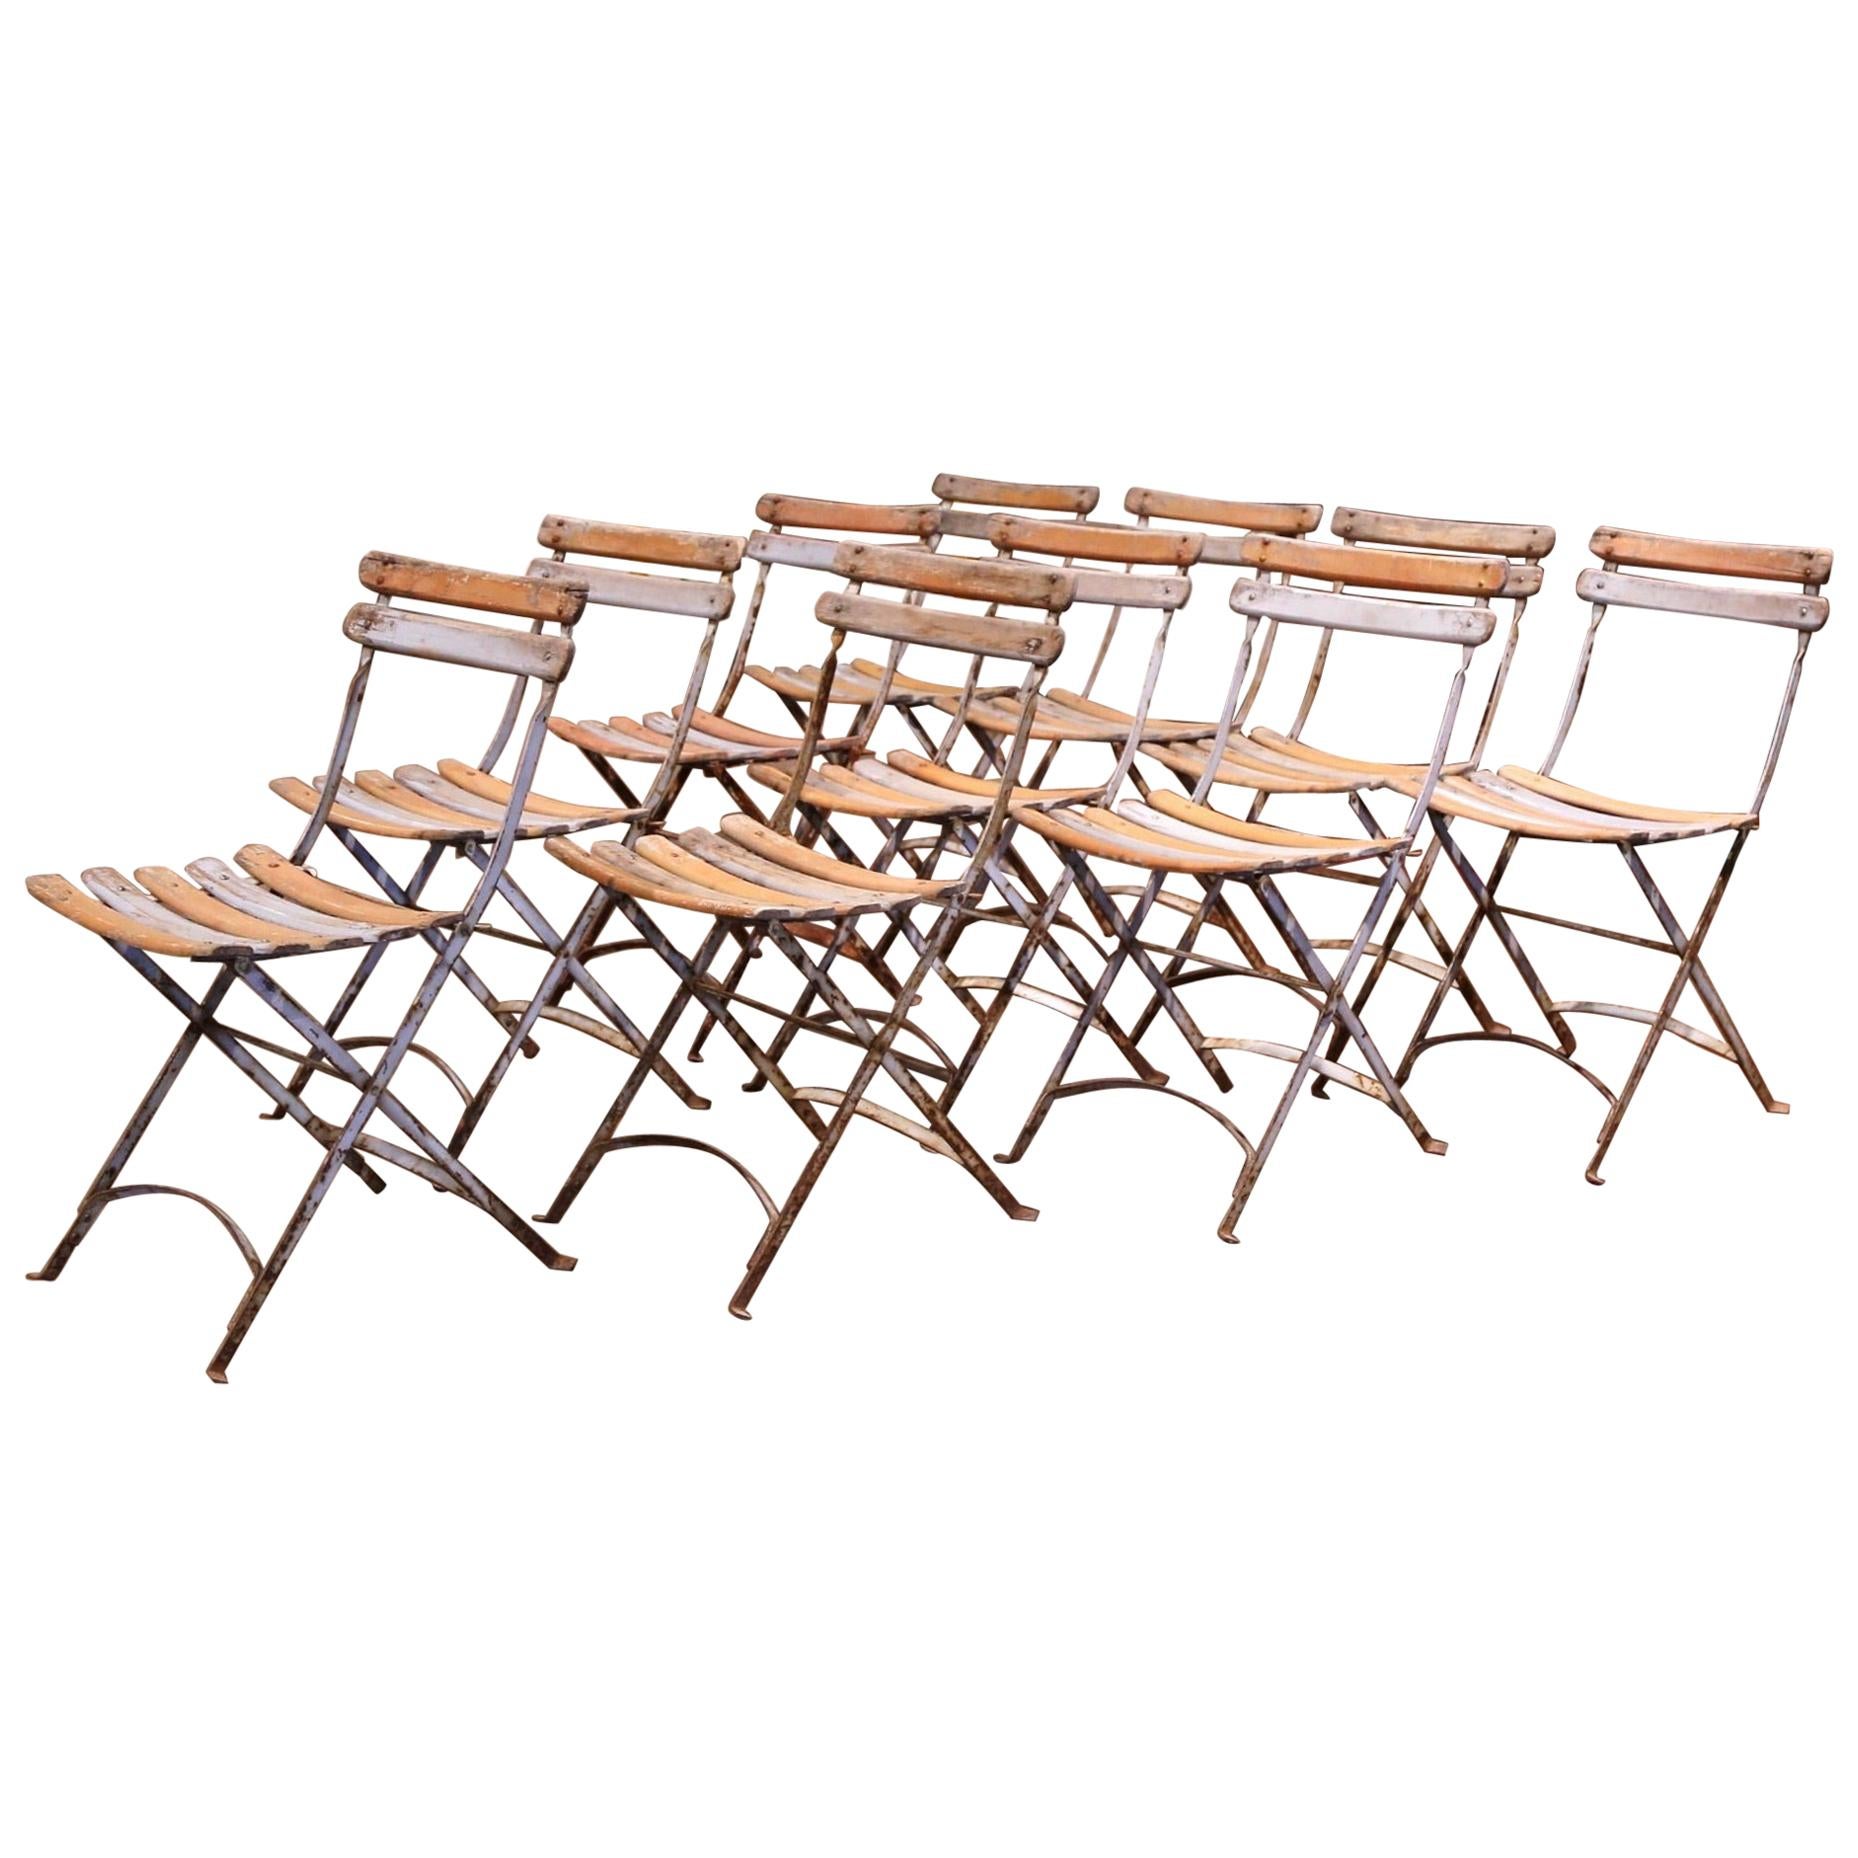 1920s French Iron and Wood Painted Folding Bistrot Chairs, Set of Ten